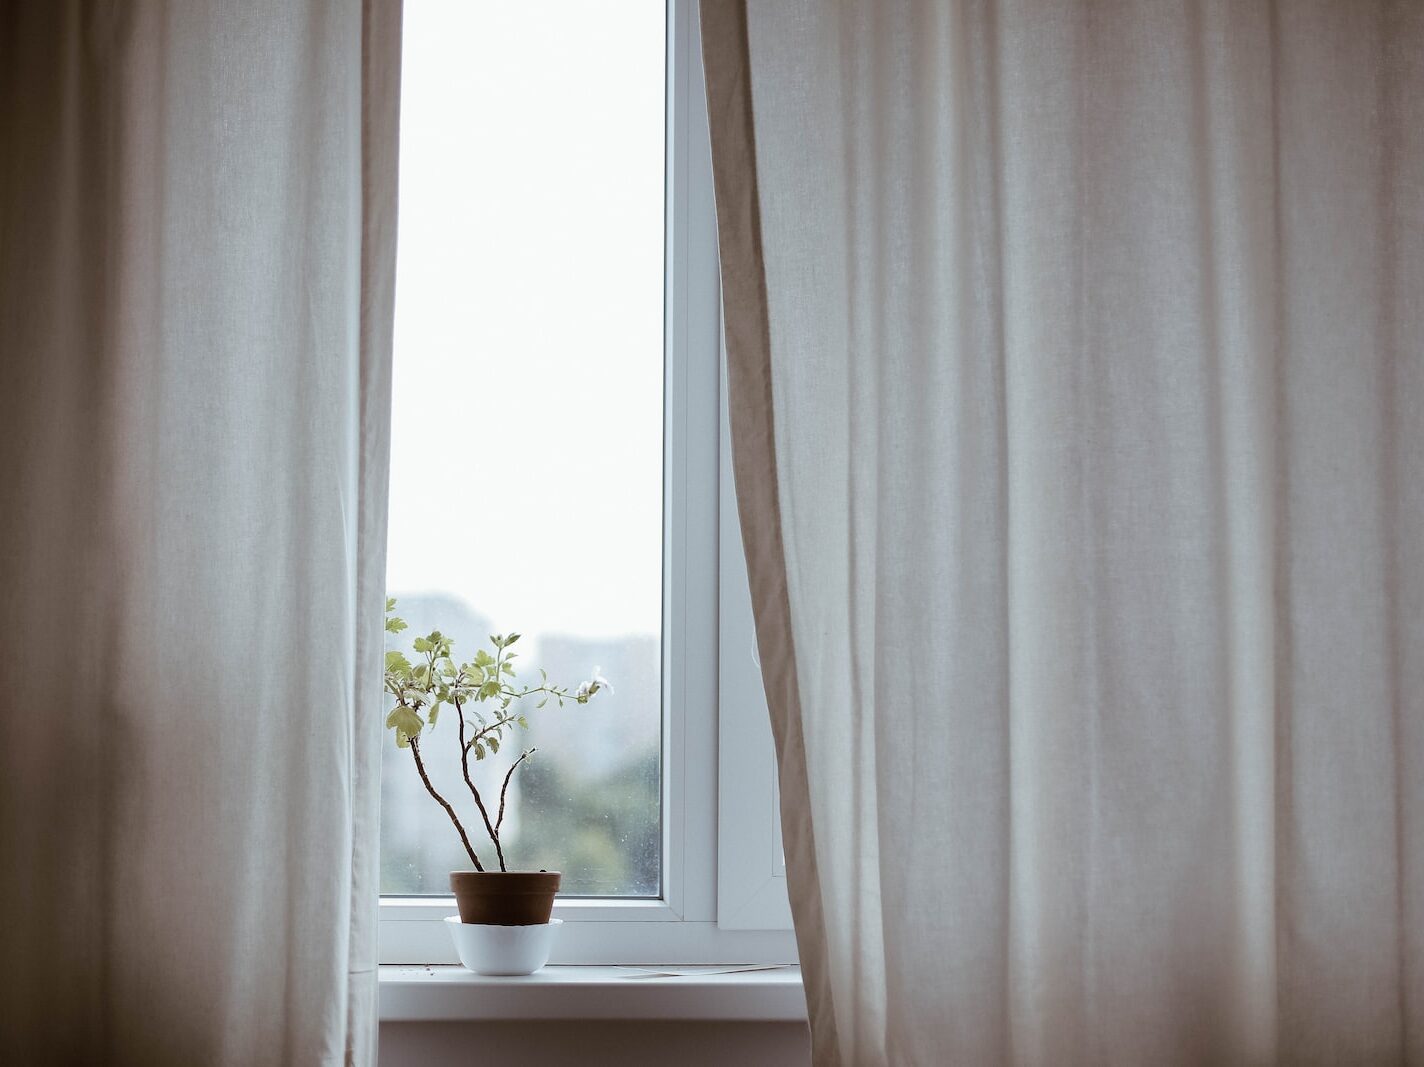 potted plant on window with curtain